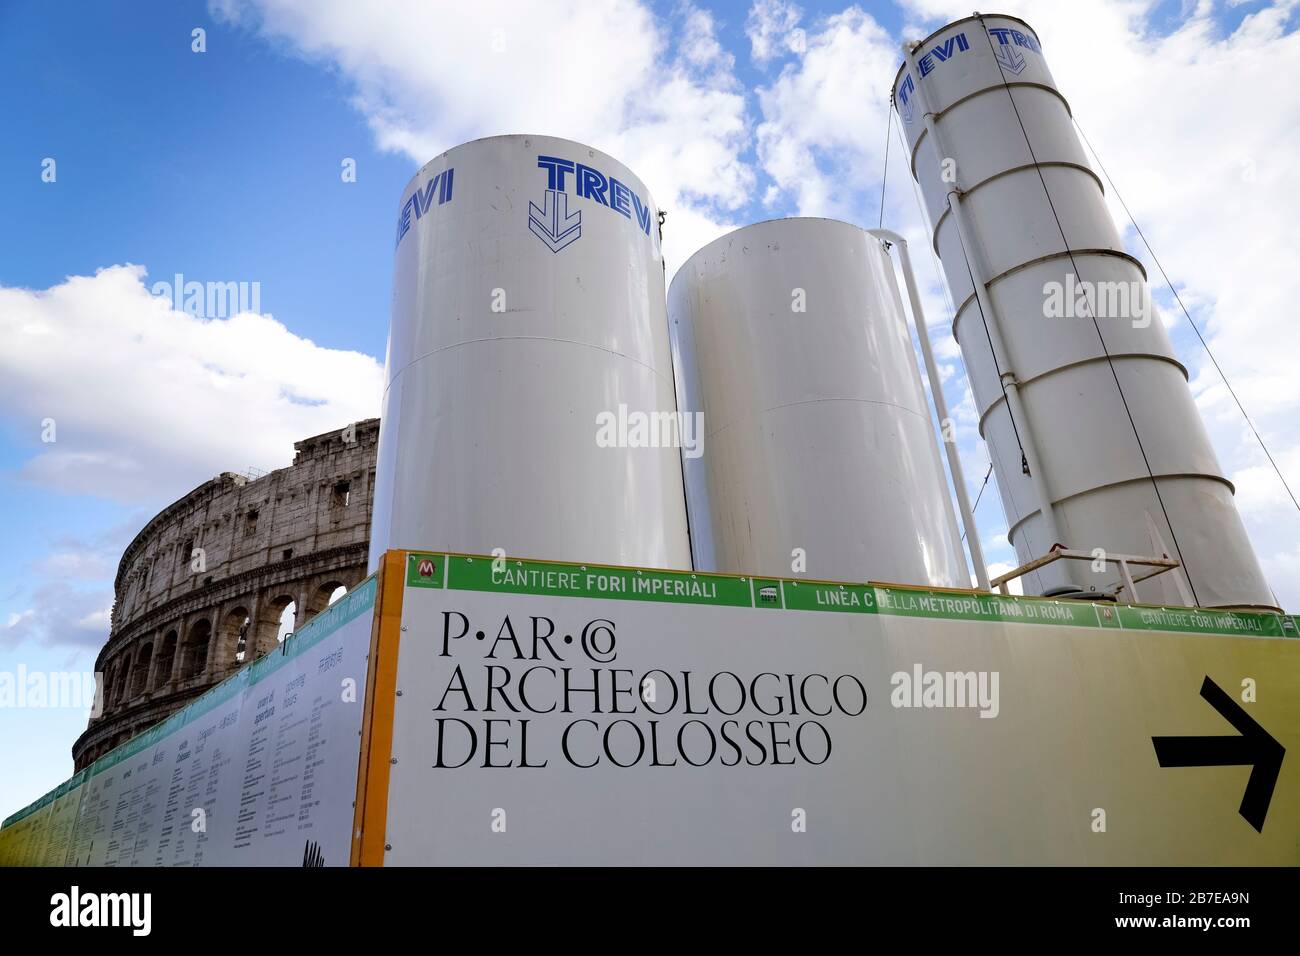 Construction site for the new C metro line, subway, underground. Concrete mixing towers. Colosseum on the background. Rome historic centre. Italy, EU Stock Photo